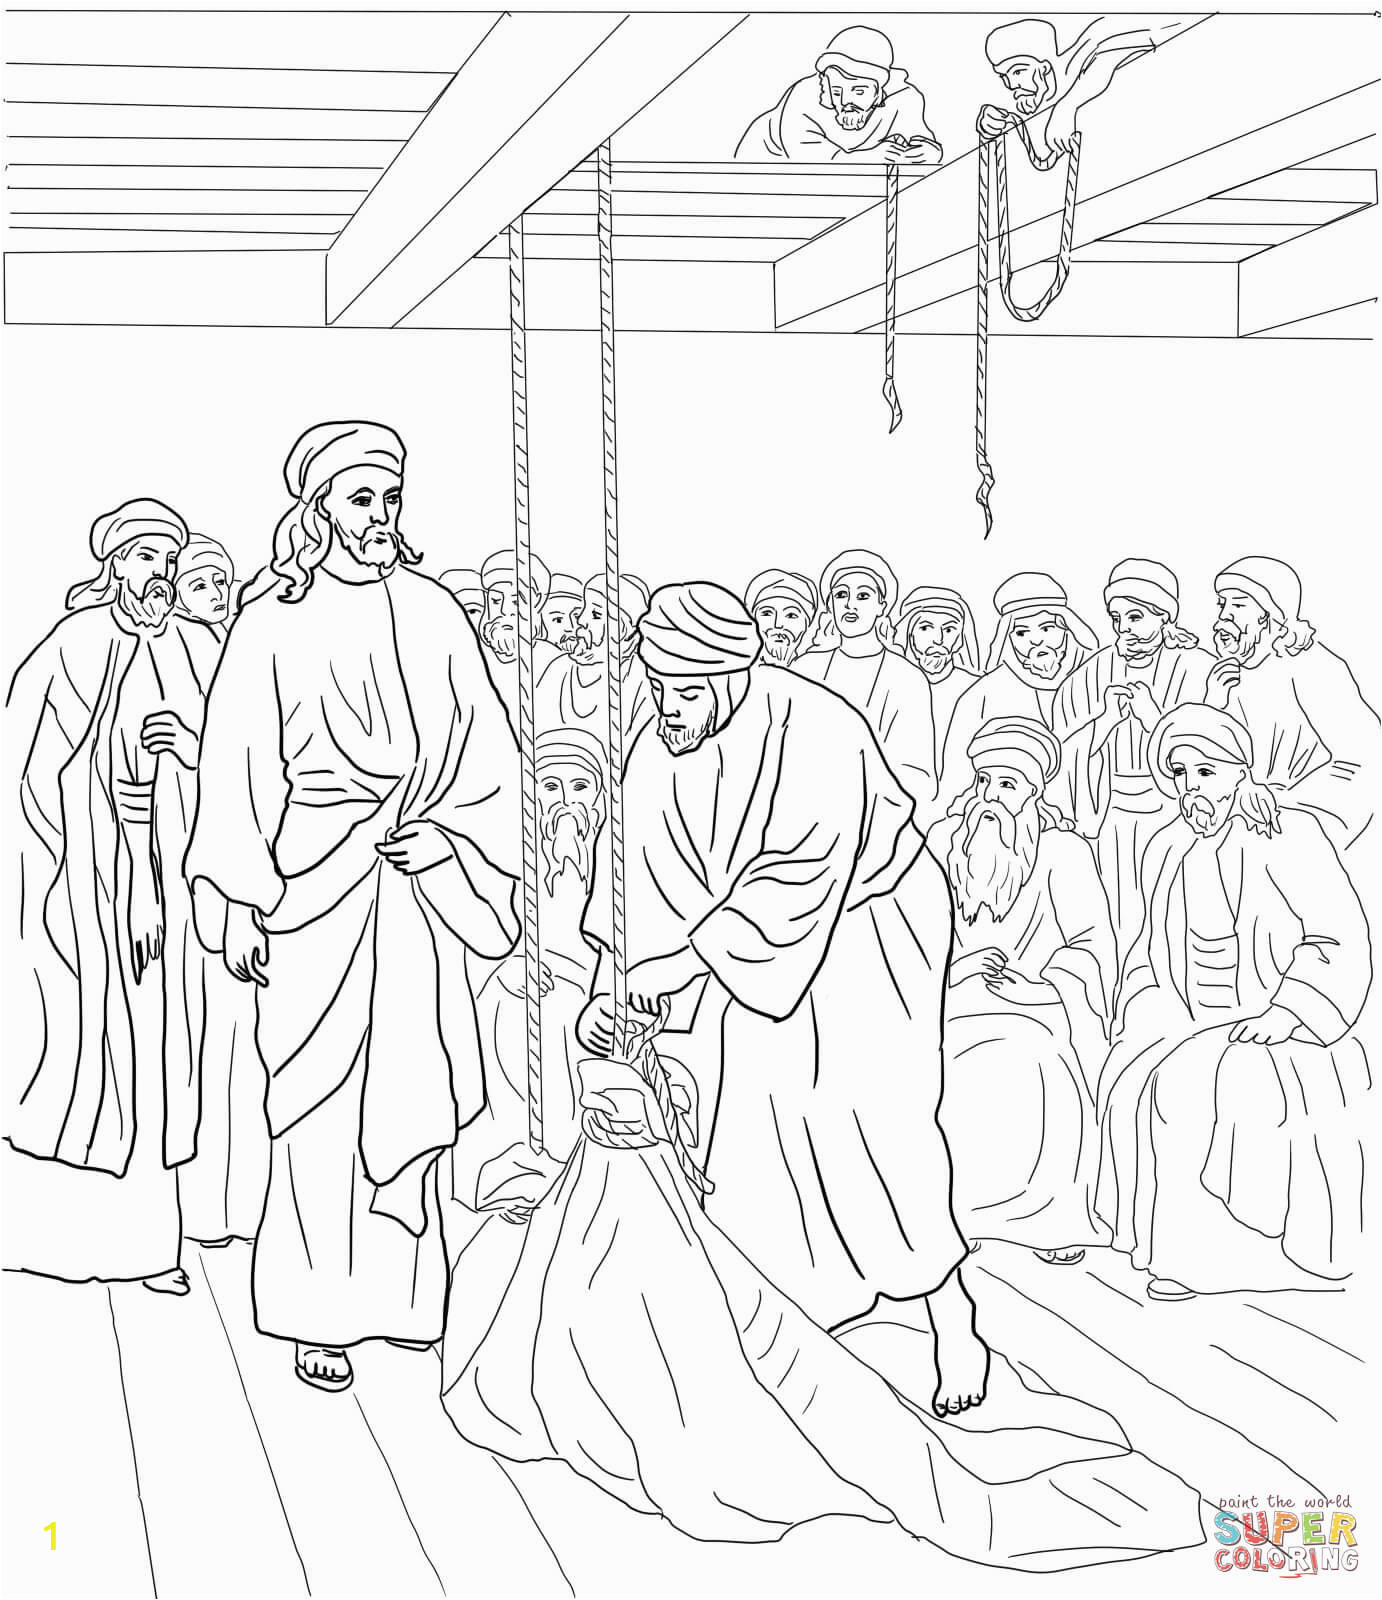 Coloring Page Of Jesus Healing the Paralytic Jesus Heals the Paralyzed Man Coloring Page